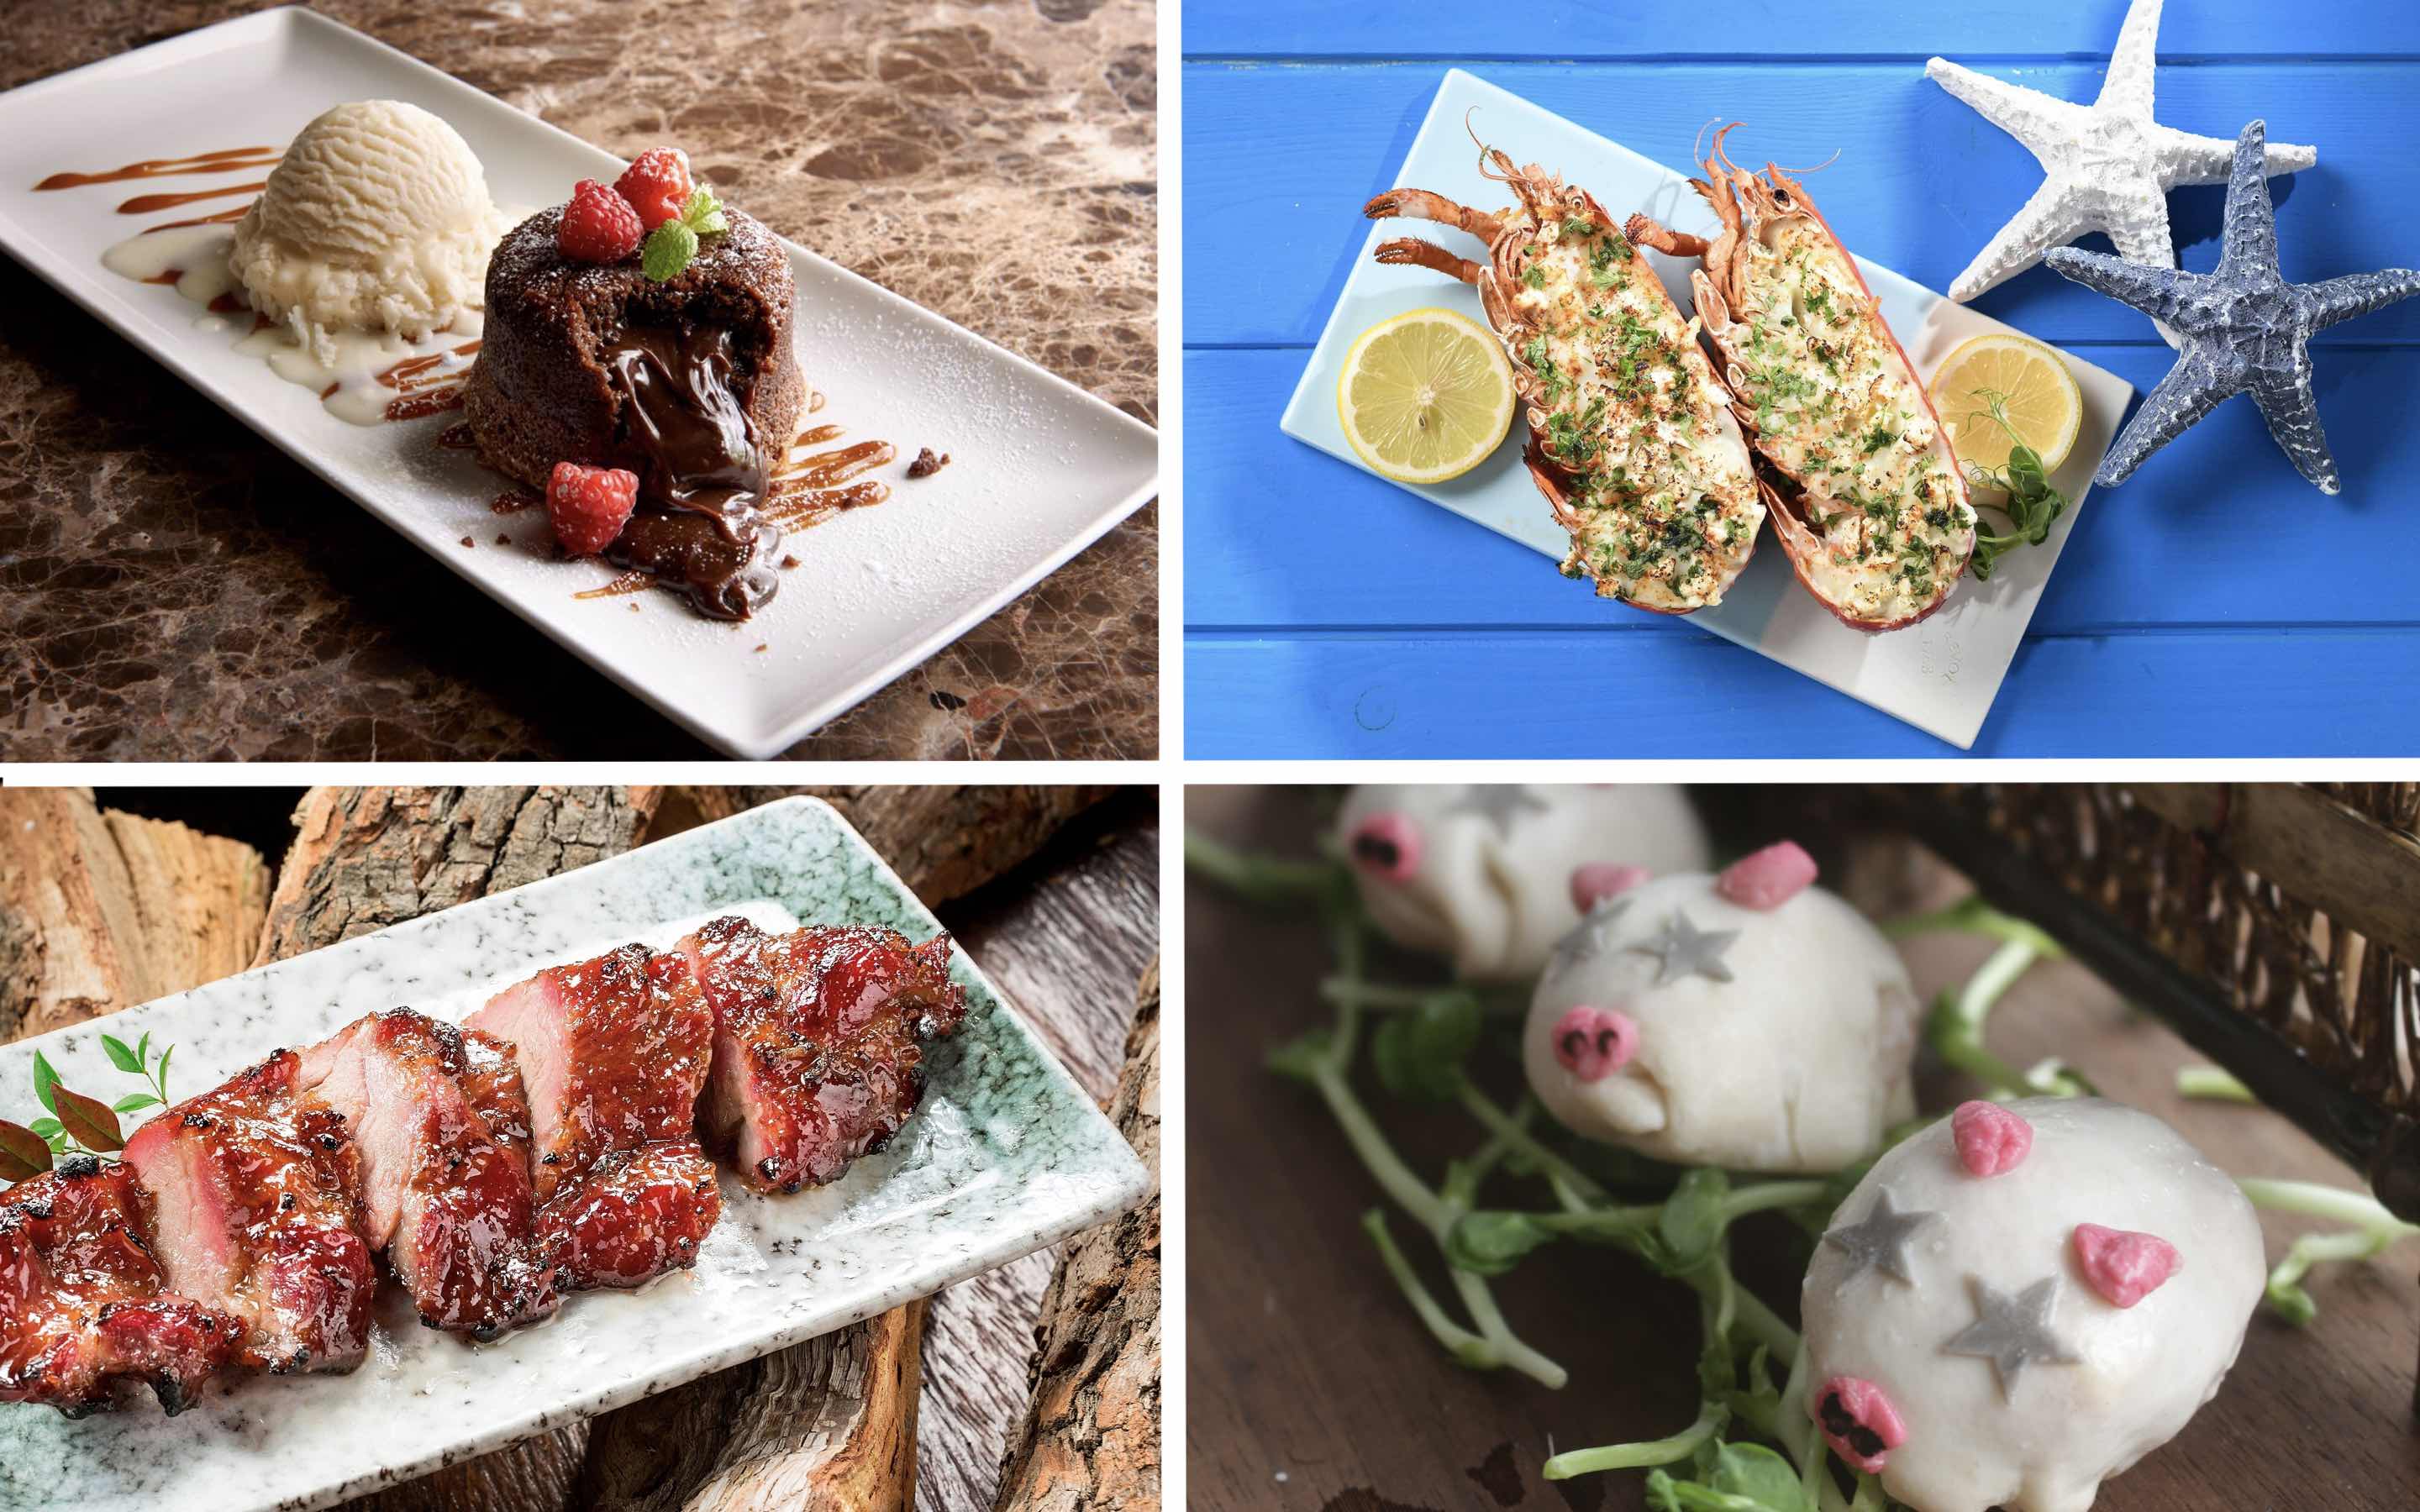 (Clockwise from top left) Morton’s hot chocolate cake, The Place’s baked lobster with feta cheese, Jade Dragon’s Iberico pork, and Drunken Pot’s piggy dumplings. Photos: Katherine Amara, Cordis, Forks and Spoons and Coconuts Media